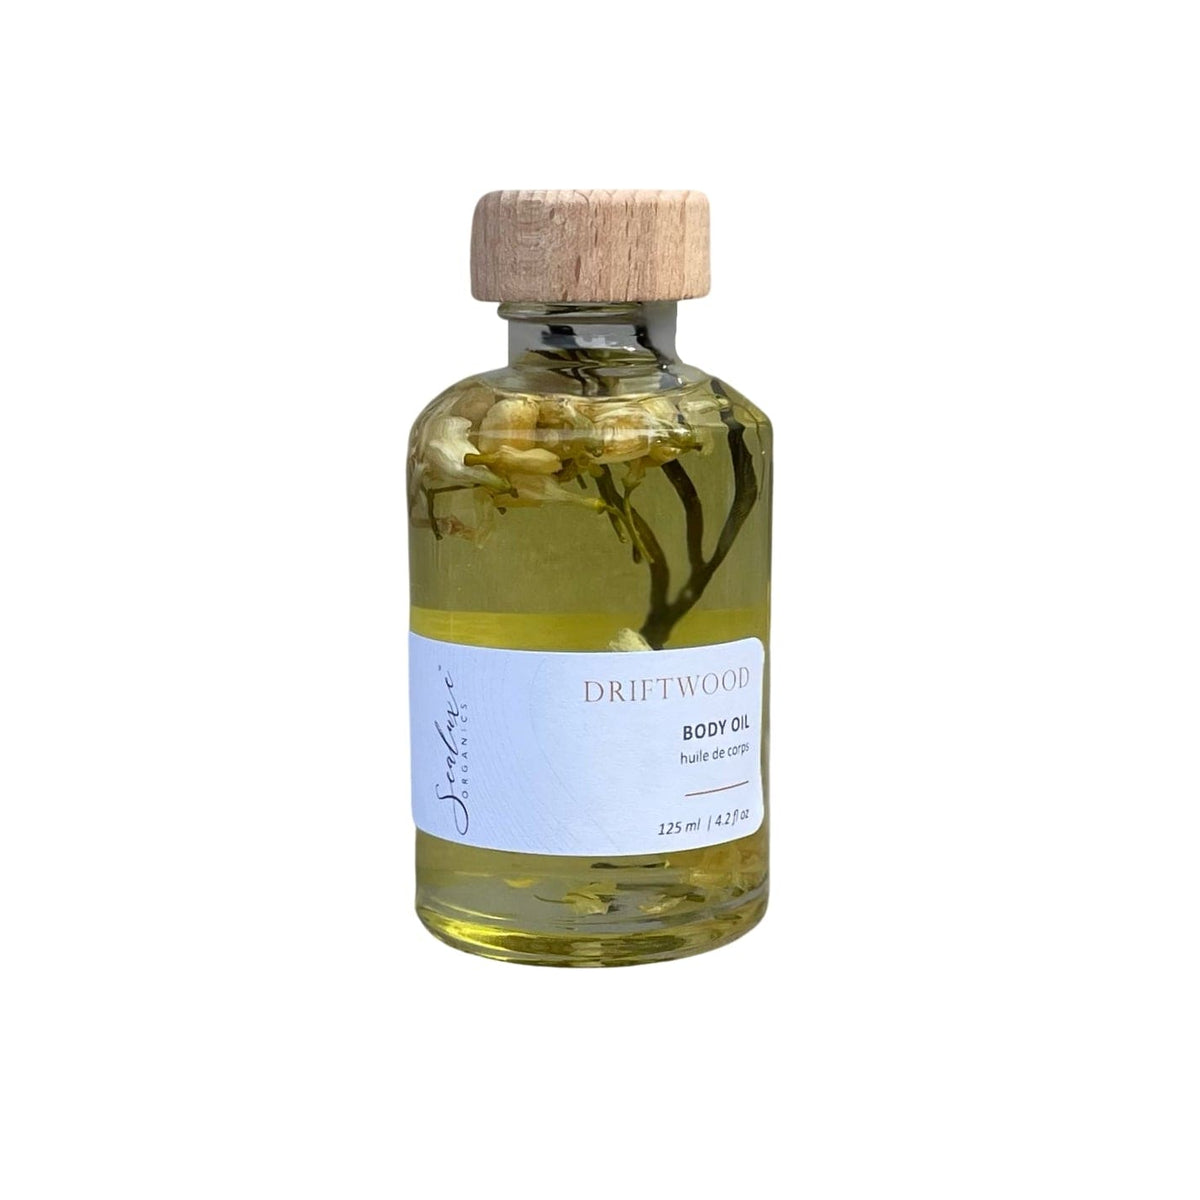 Sealuxe Driftwood Bath and Body Oil